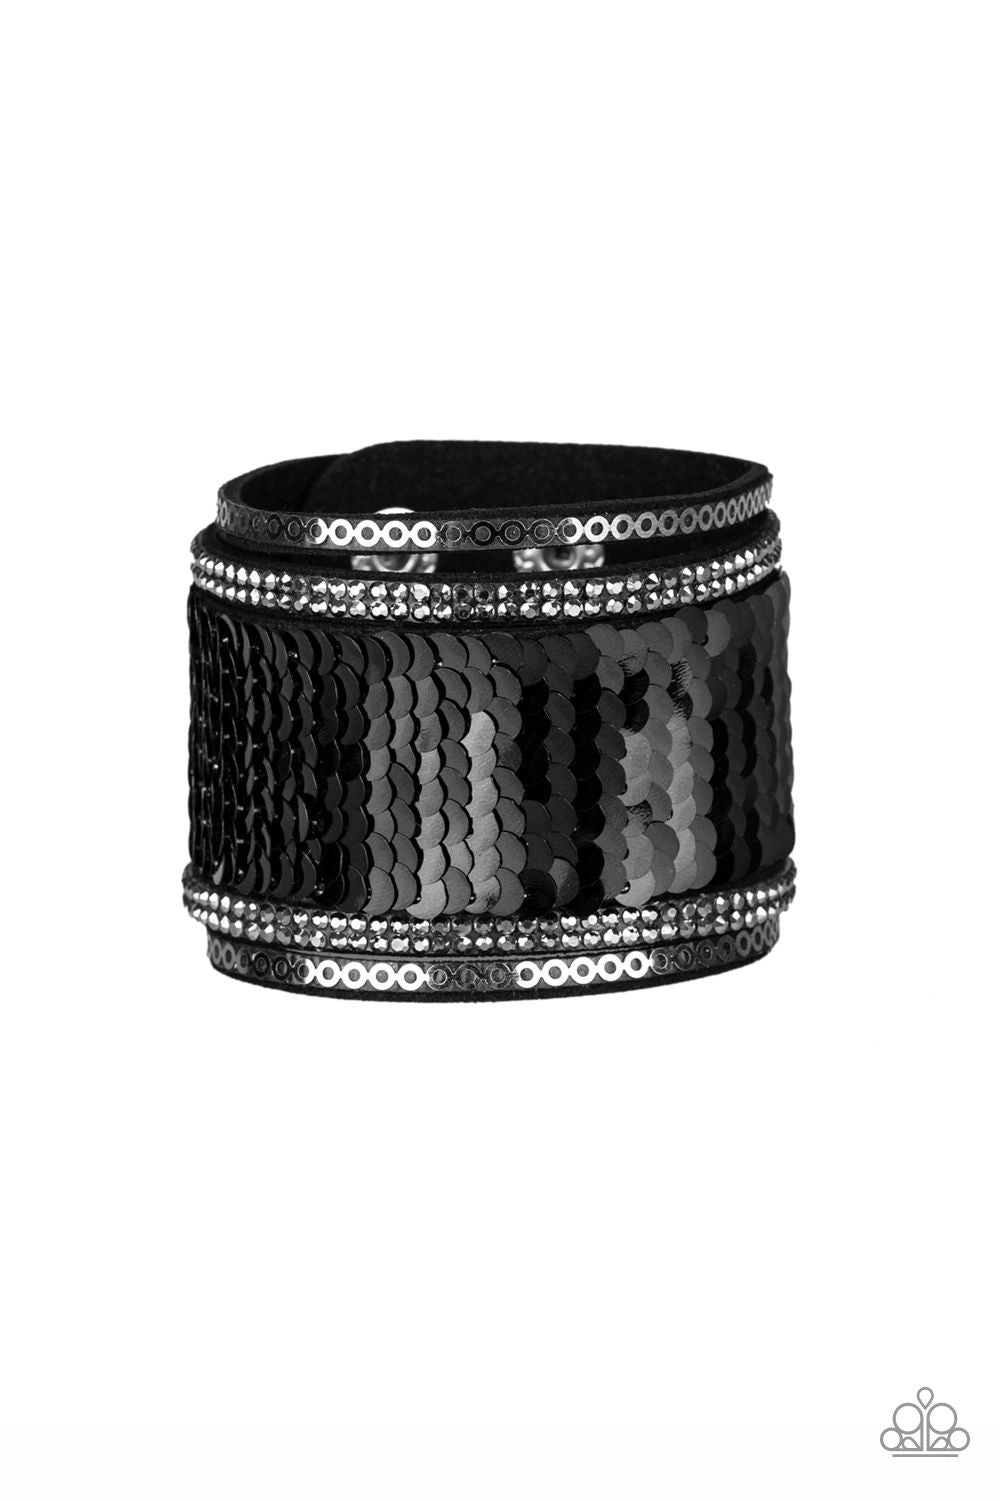 Heads or MERMAID Tails Black and Silver Sequin Reversible Urban Wrap Snap Bracelet - Paparazzi Accessories - reverse side on model -CarasShop.com - $5 Jewelry by Cara Jewels